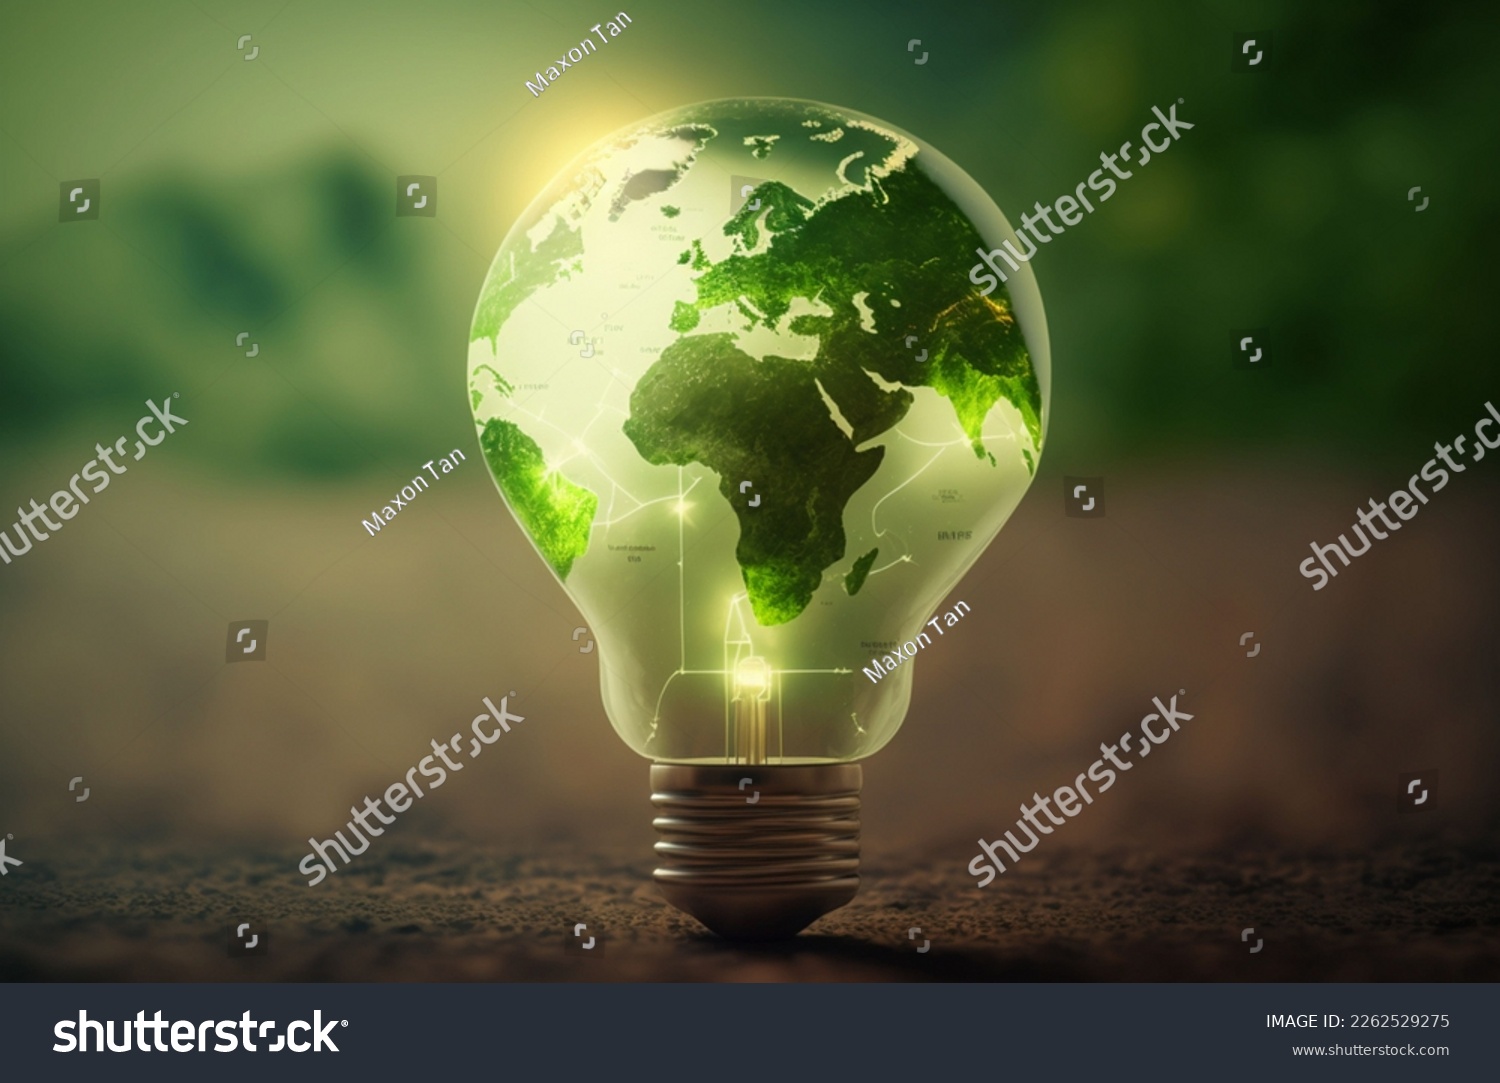 Green World Map On The Light Bulb With Green Background, Renewable Energy Environmental Protection, Renewable, Sustainable Energy Sources. Environmental Friendly. Renewable Energy  #2262529275